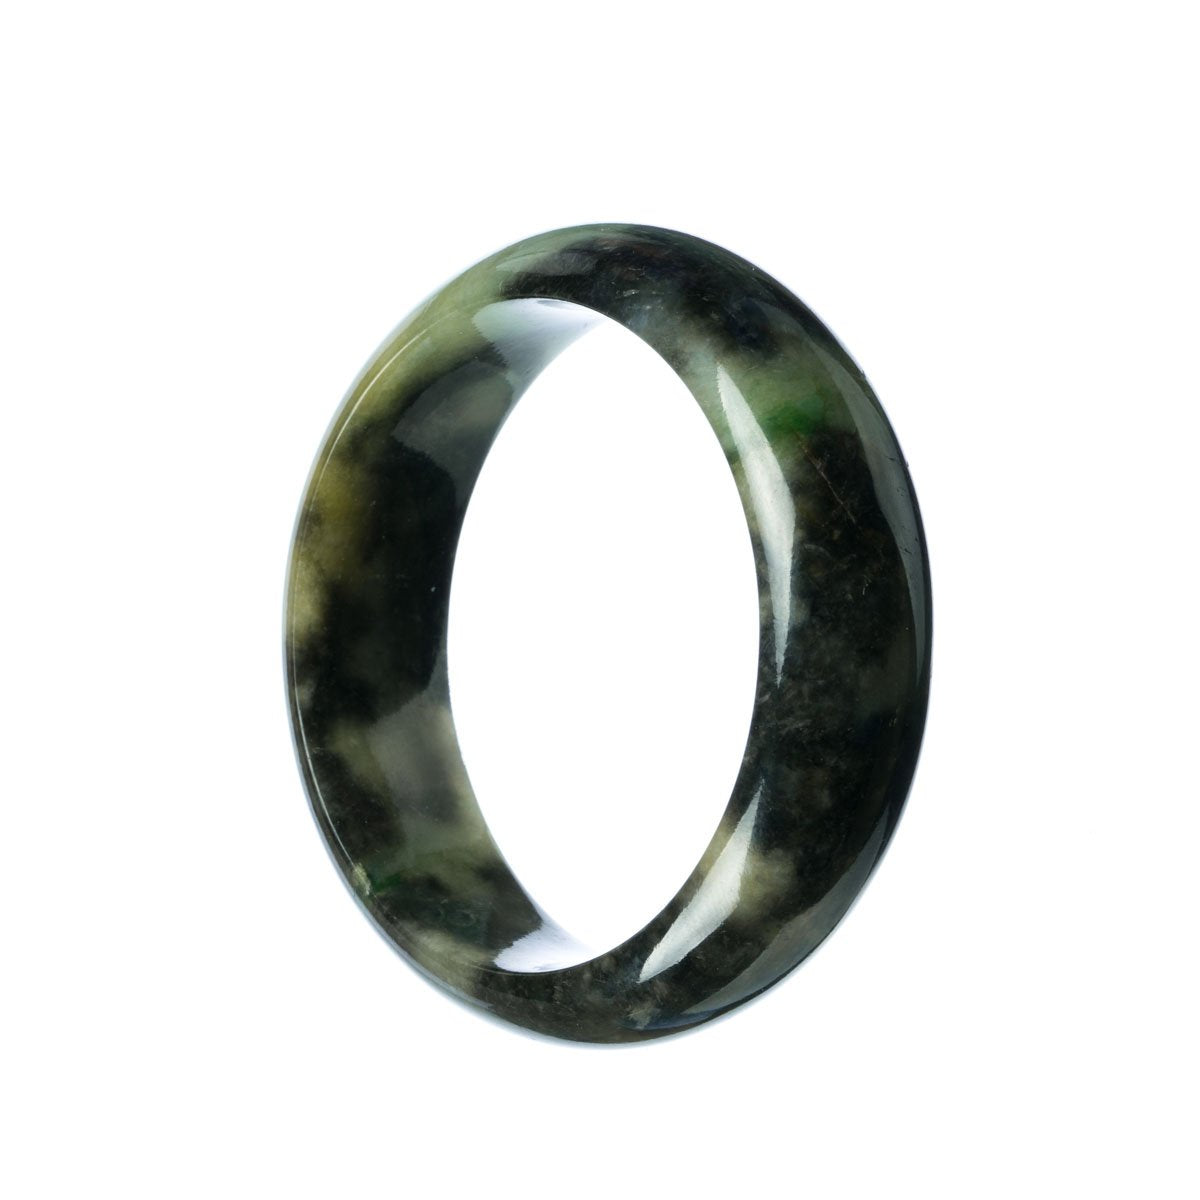 A half-moon shaped bracelet made from genuine Grade A Burmese Jade, featuring a vibrant green and yellow color.